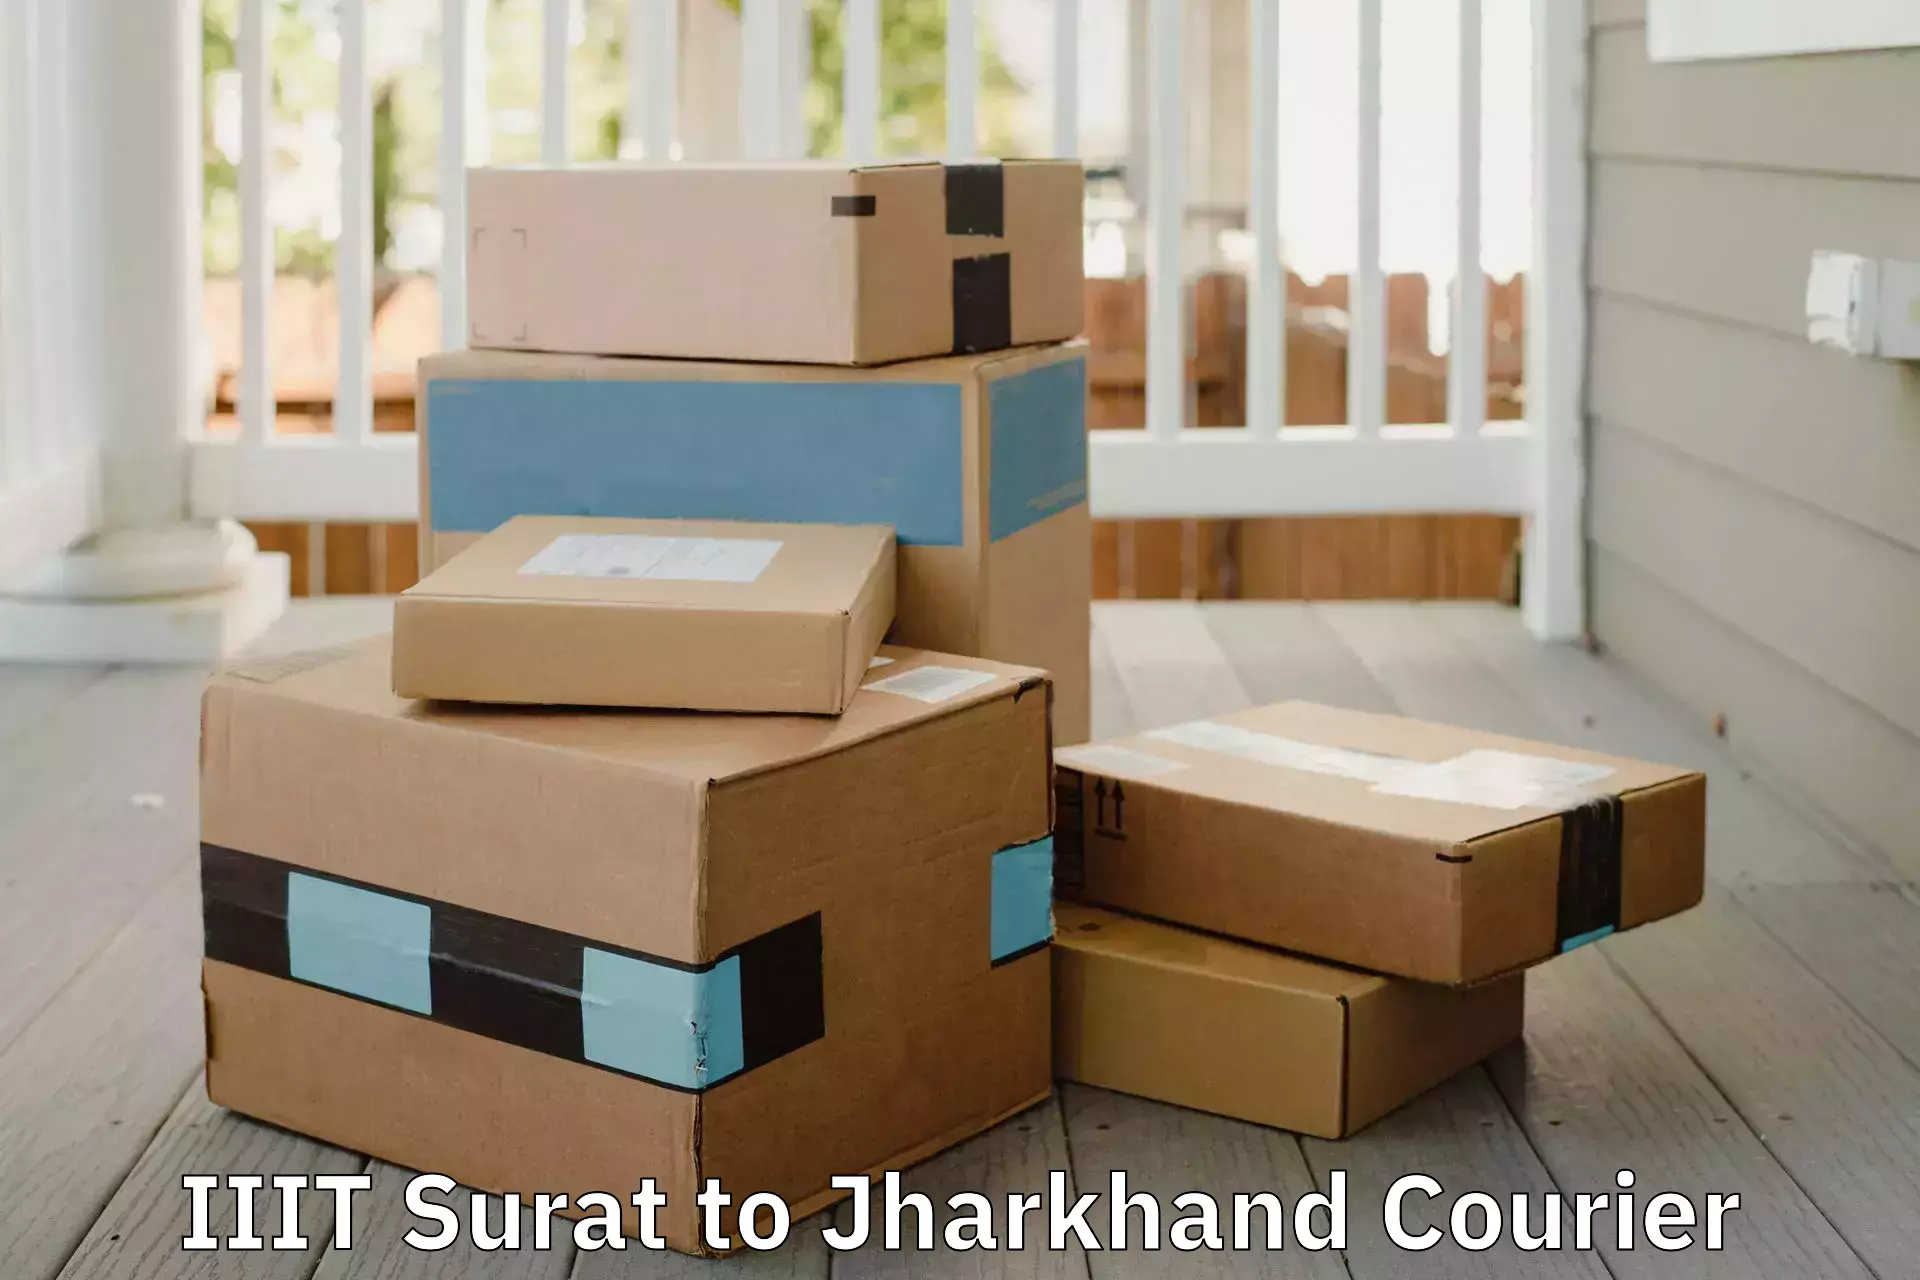 Budget-friendly movers IIIT Surat to Jharkhand